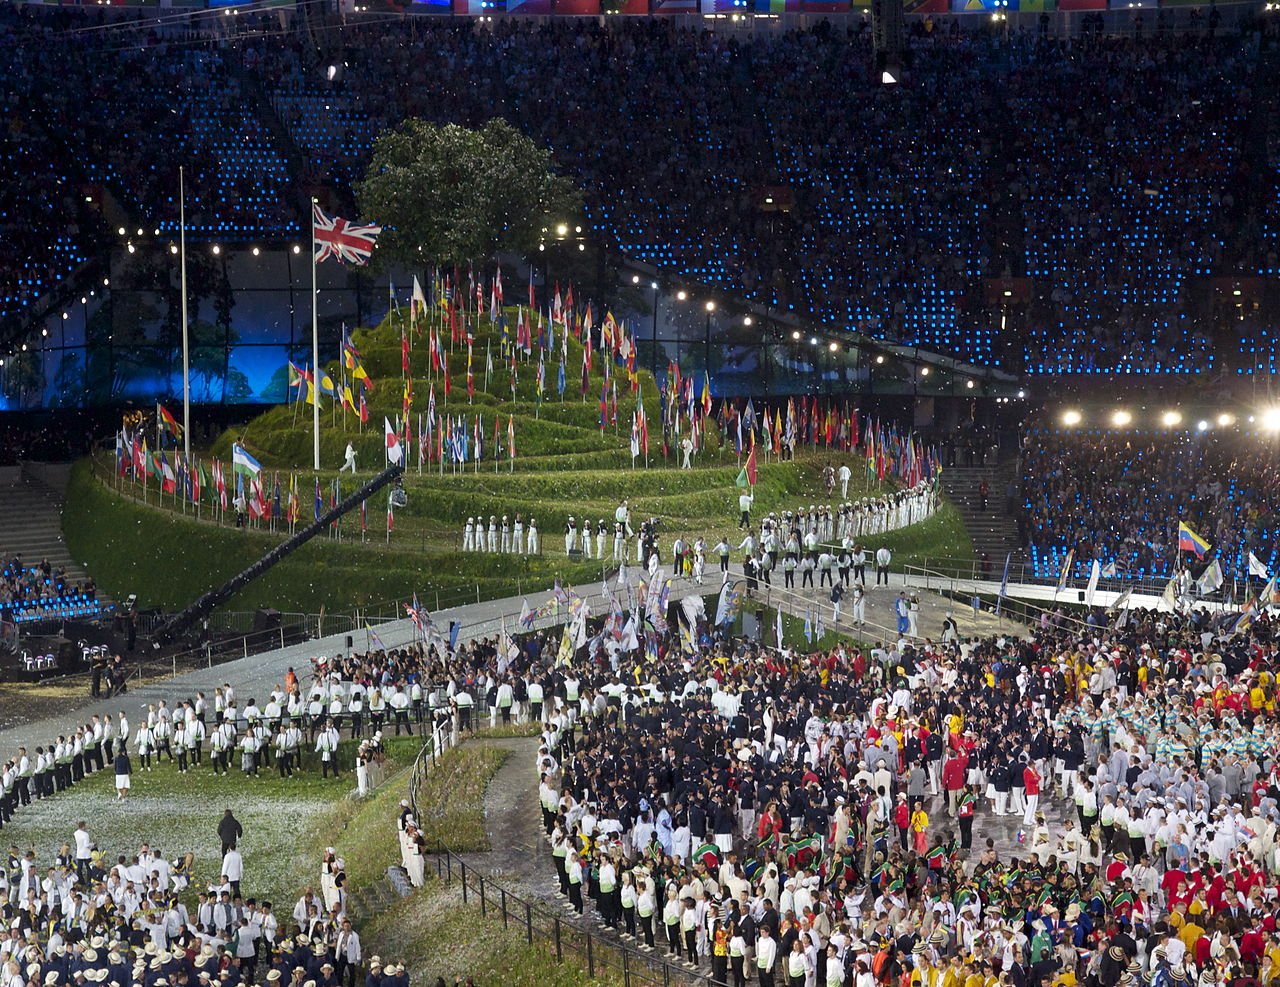 2012 Summer Olympics opening ceremony | Source: Wikimedia Commons